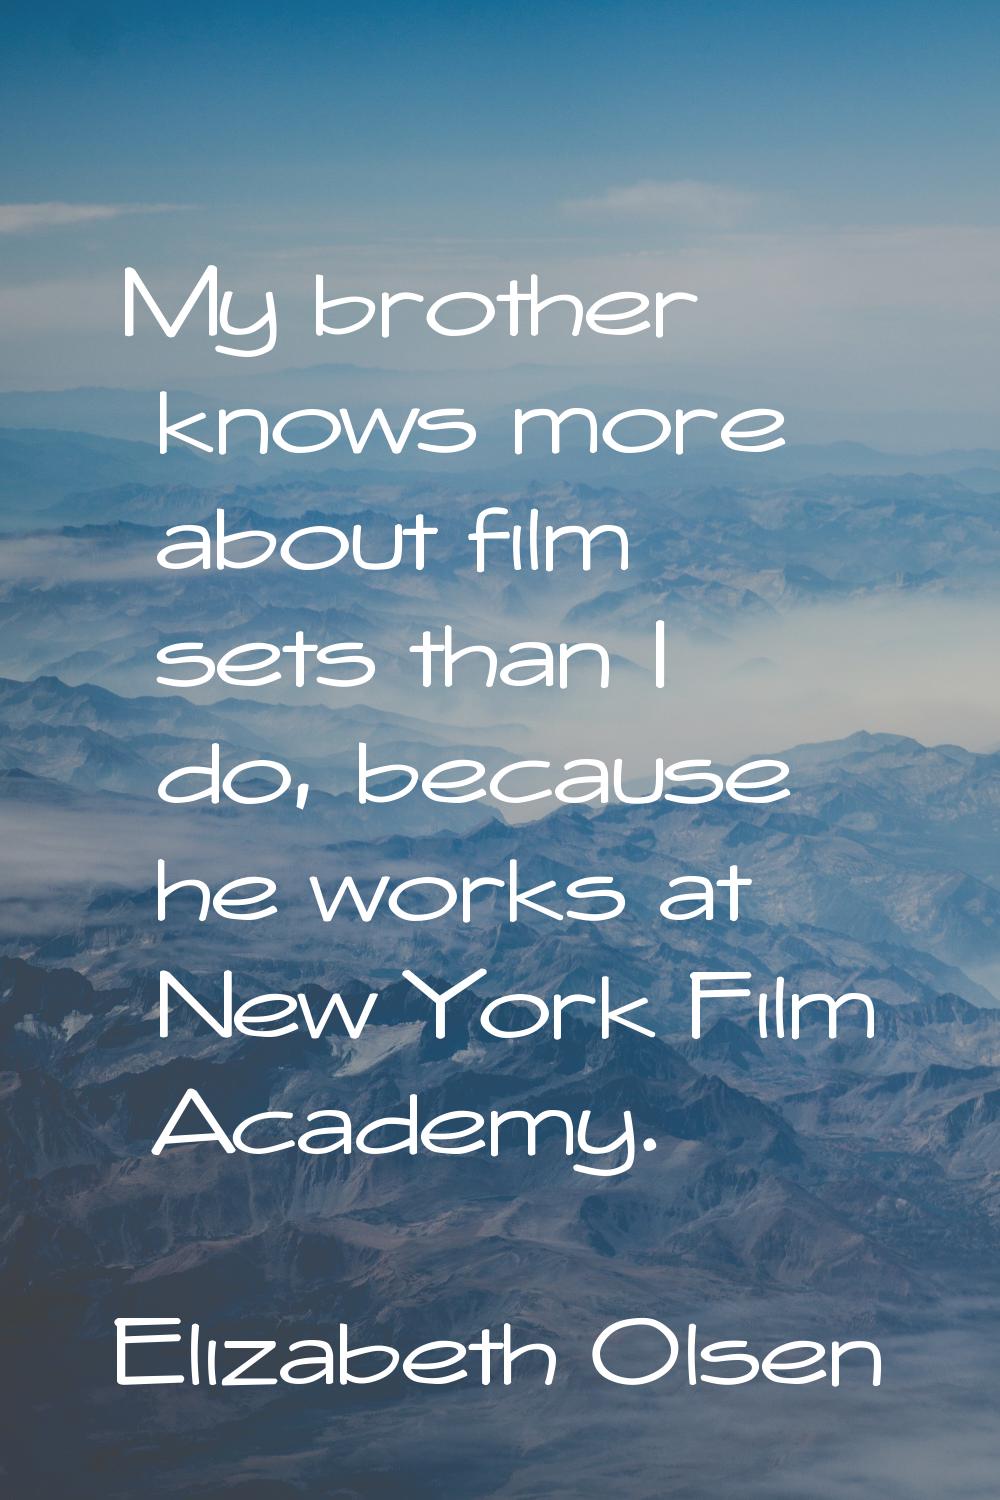 My brother knows more about film sets than I do, because he works at New York Film Academy.